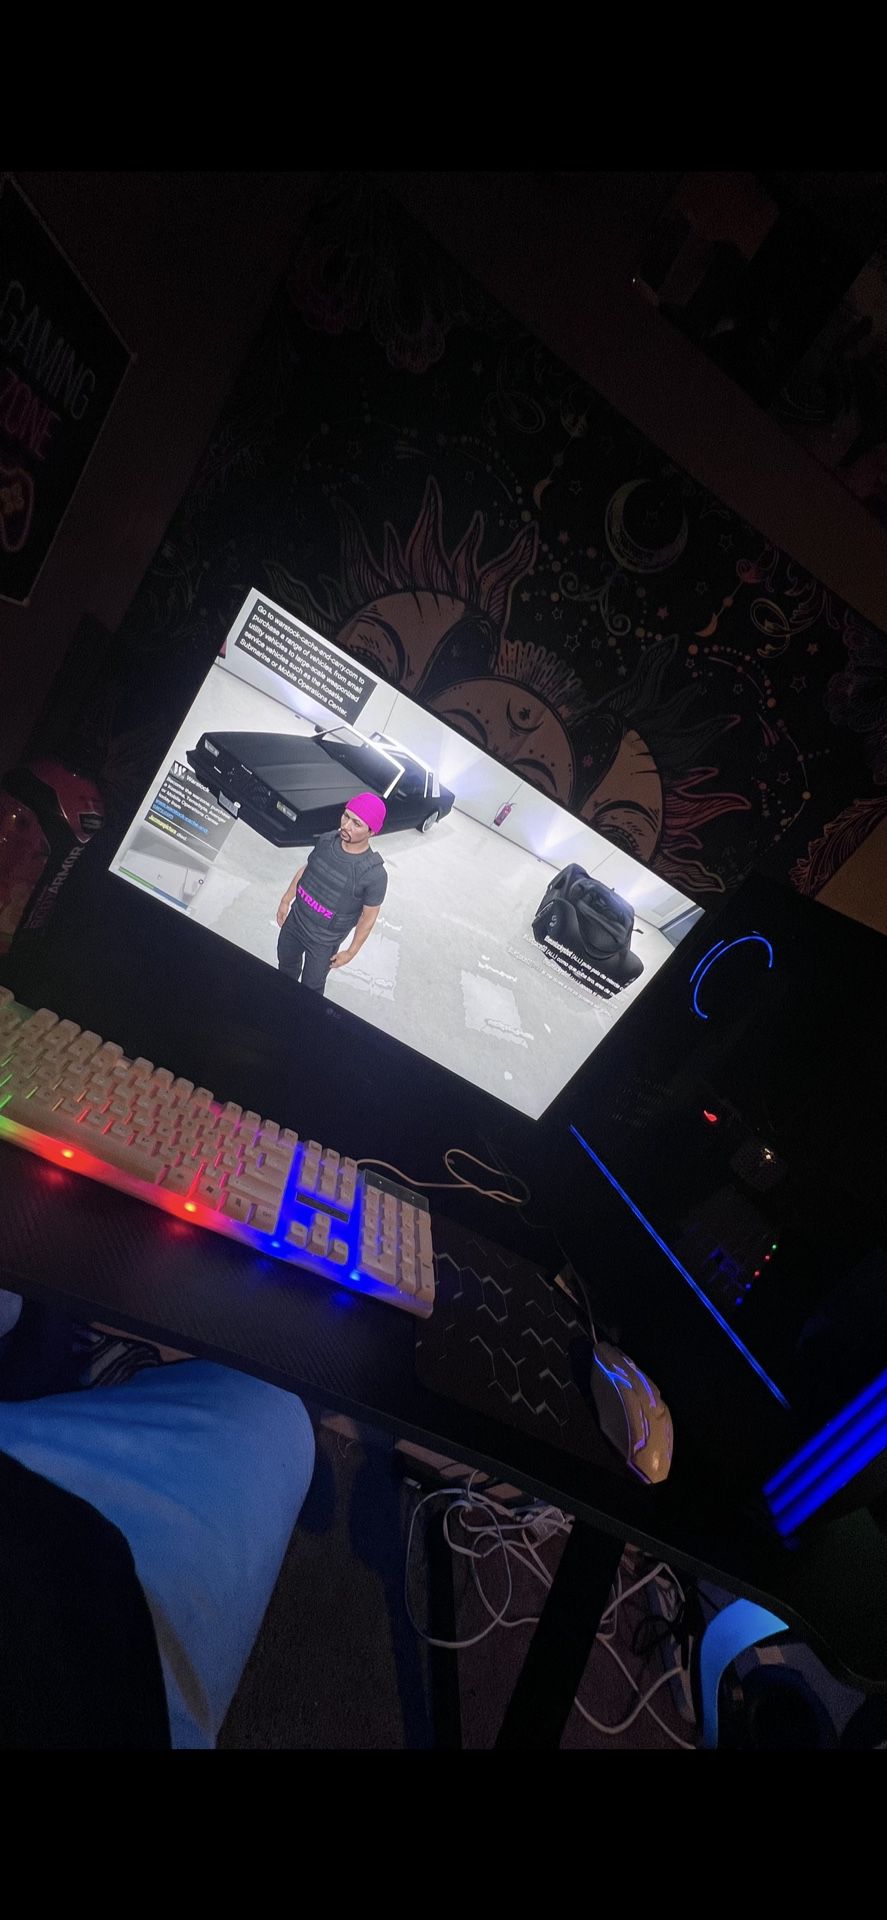 Intel i7 4770k entry level gaming PC, Lg monitor 120hz, rgb keyboard and mouse